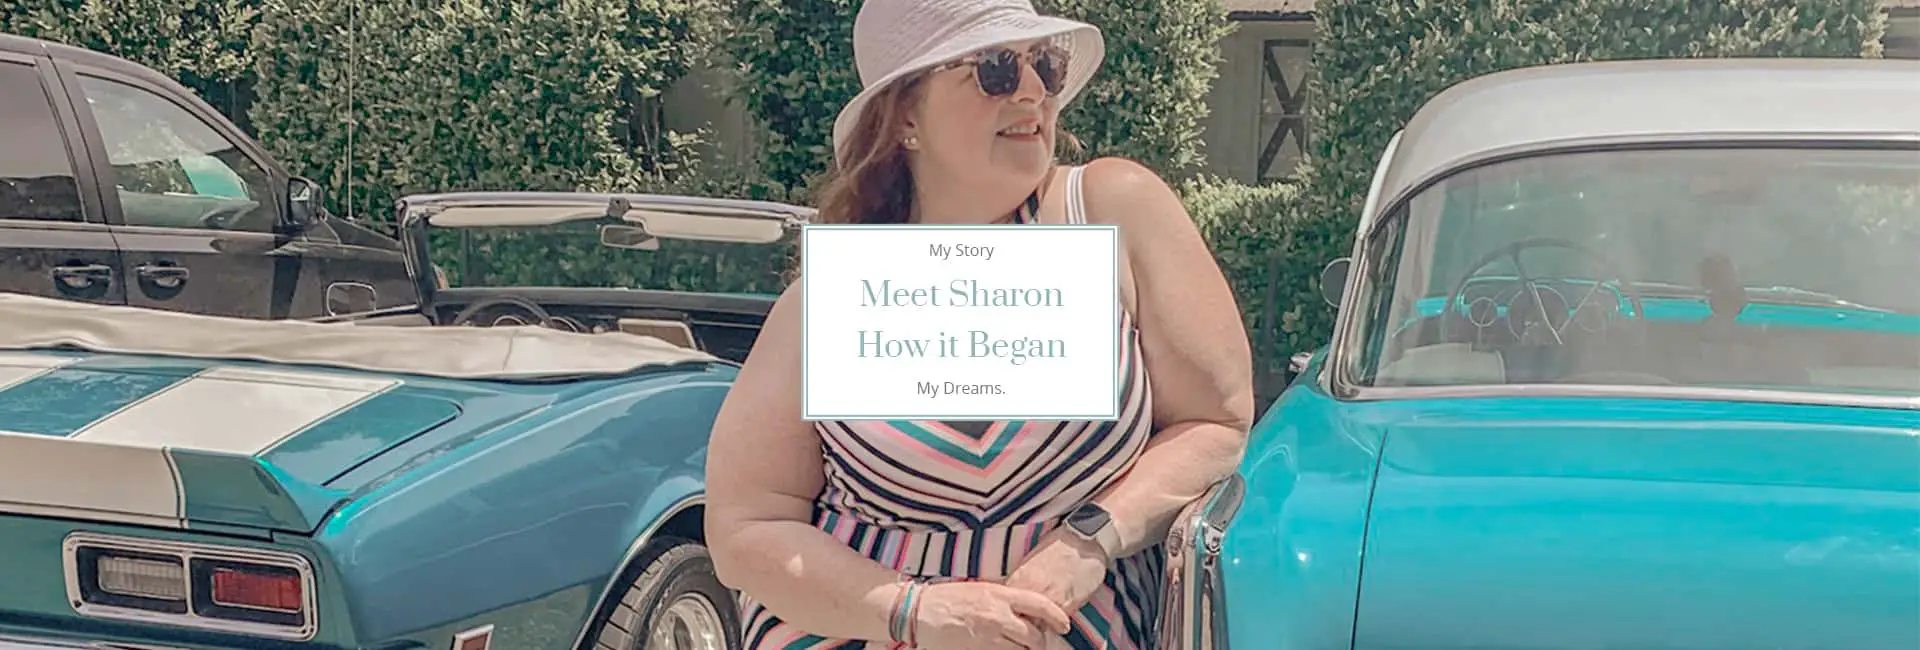 About Sharon Mendelaoui content creator life over 50